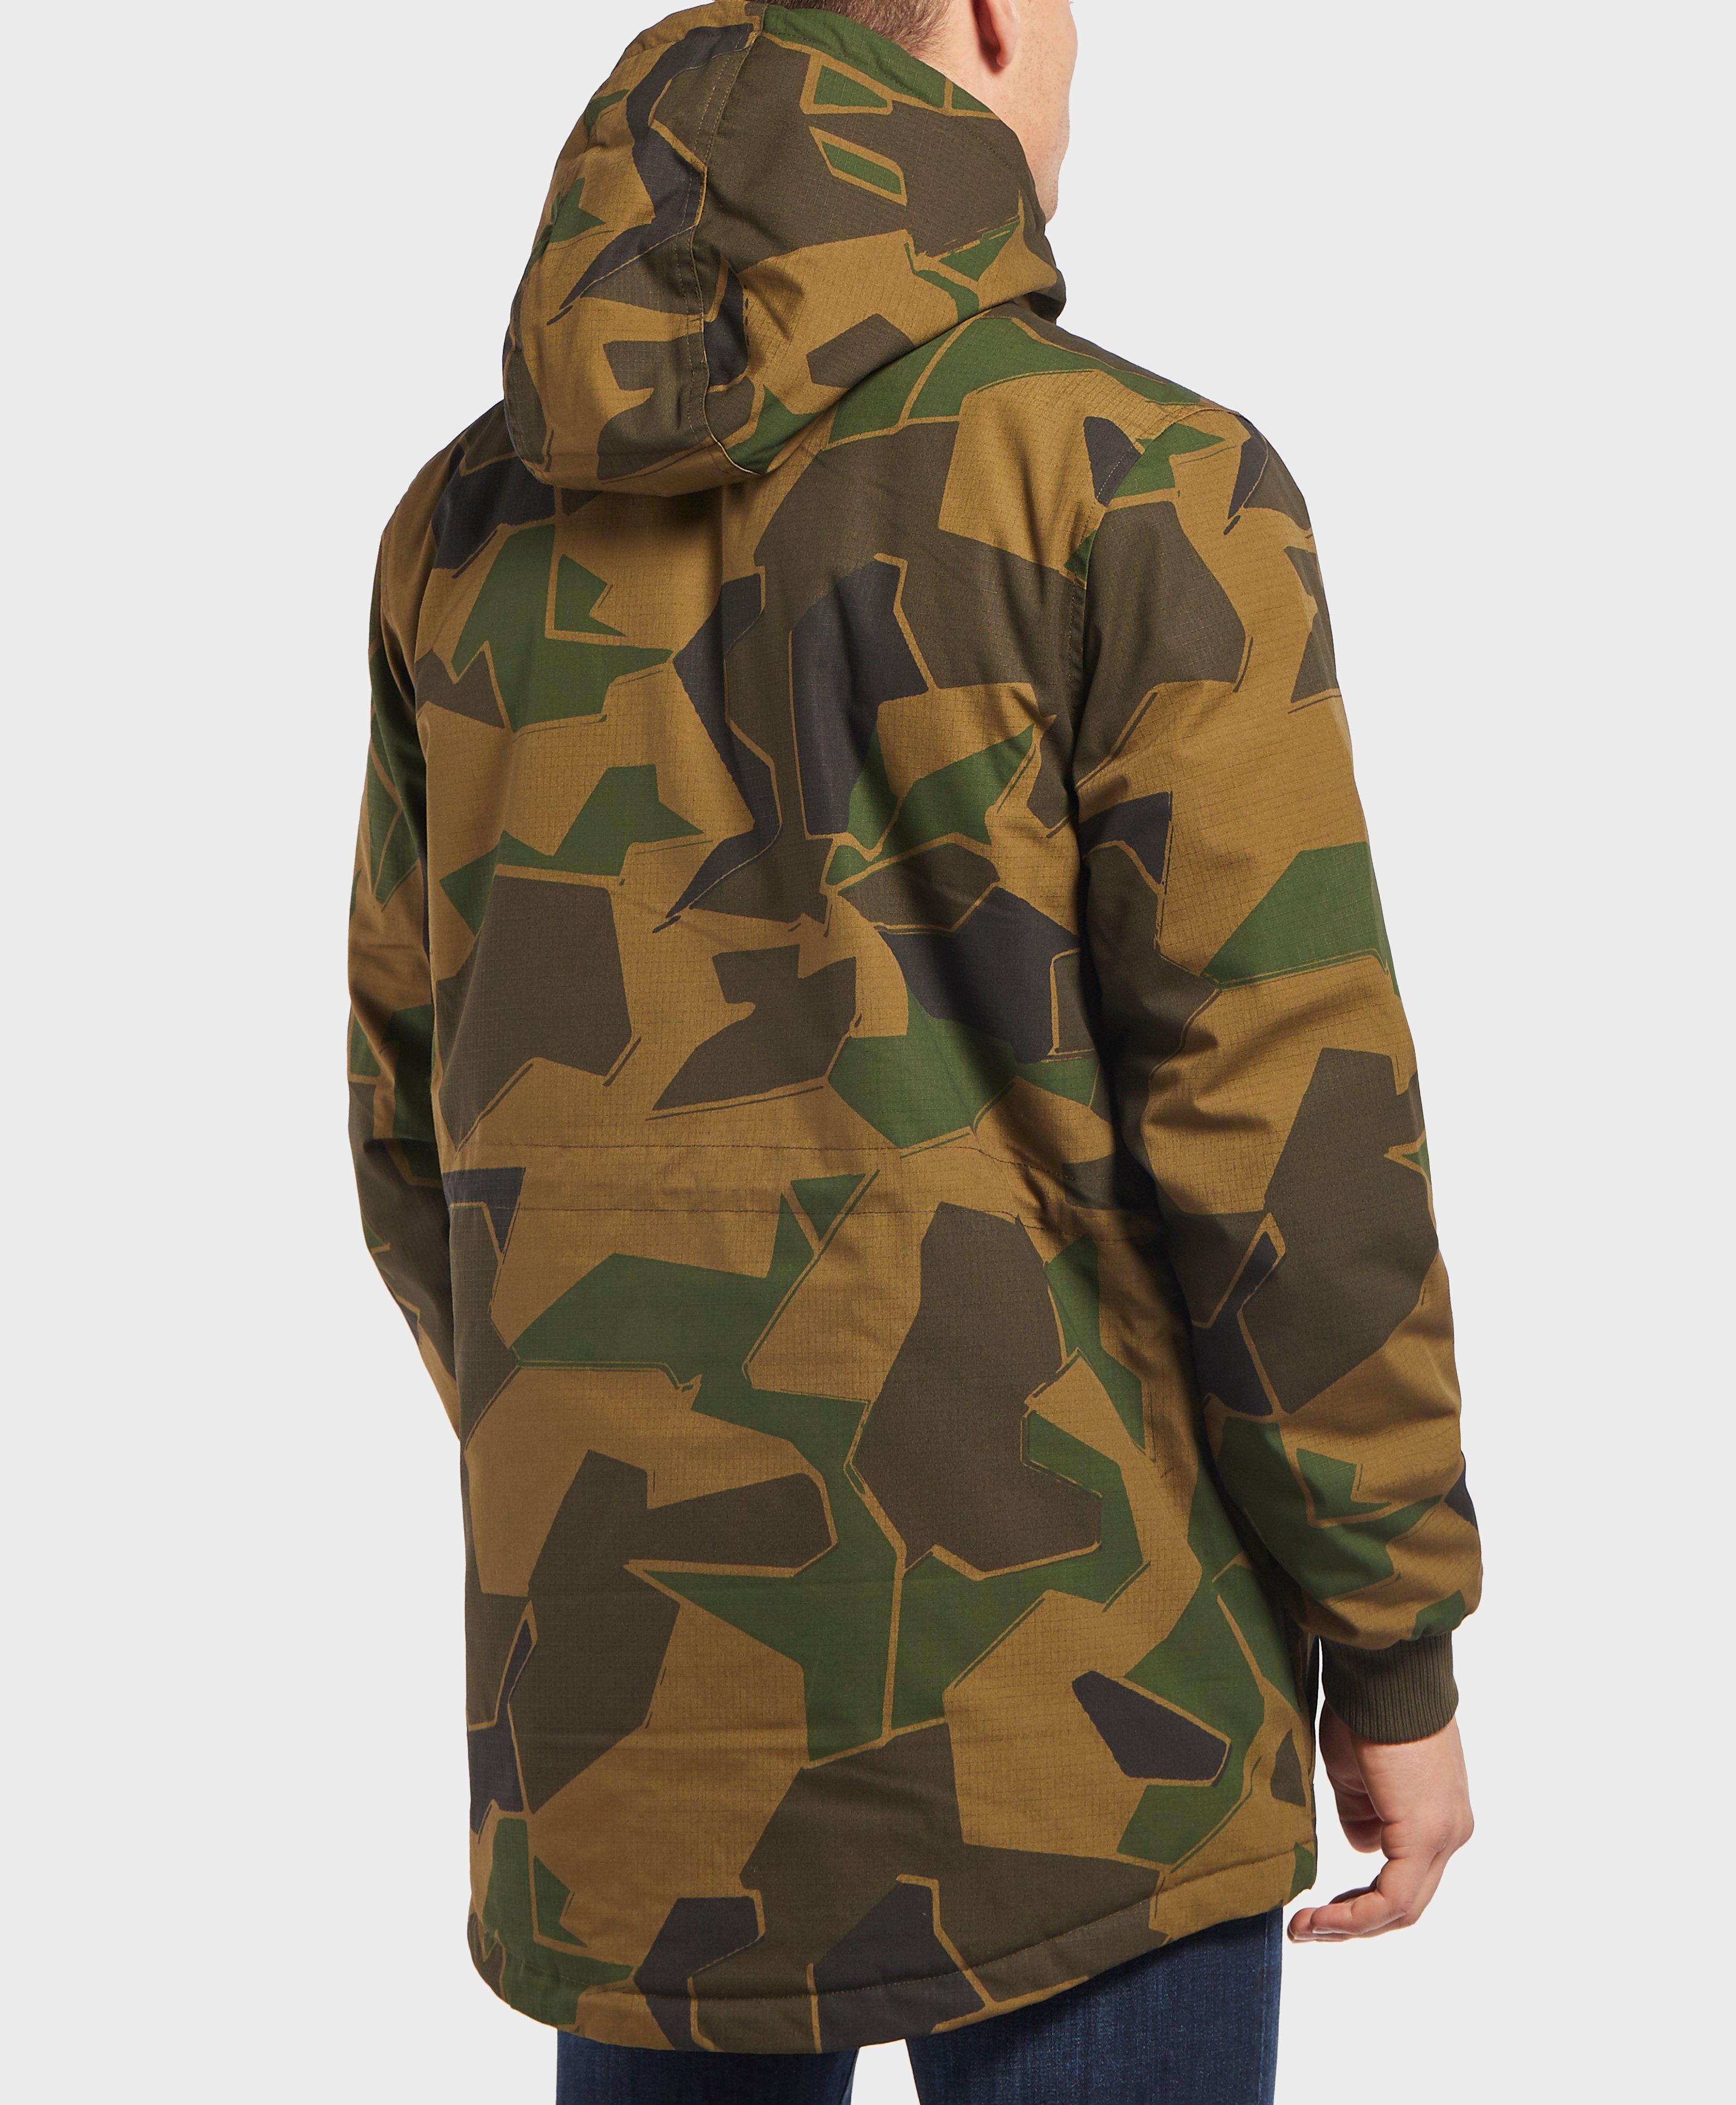 stum Gå forud Repressalier Fred Perry Synthetic X Arktis Stockport Camo Jacket in Green for Men - Lyst